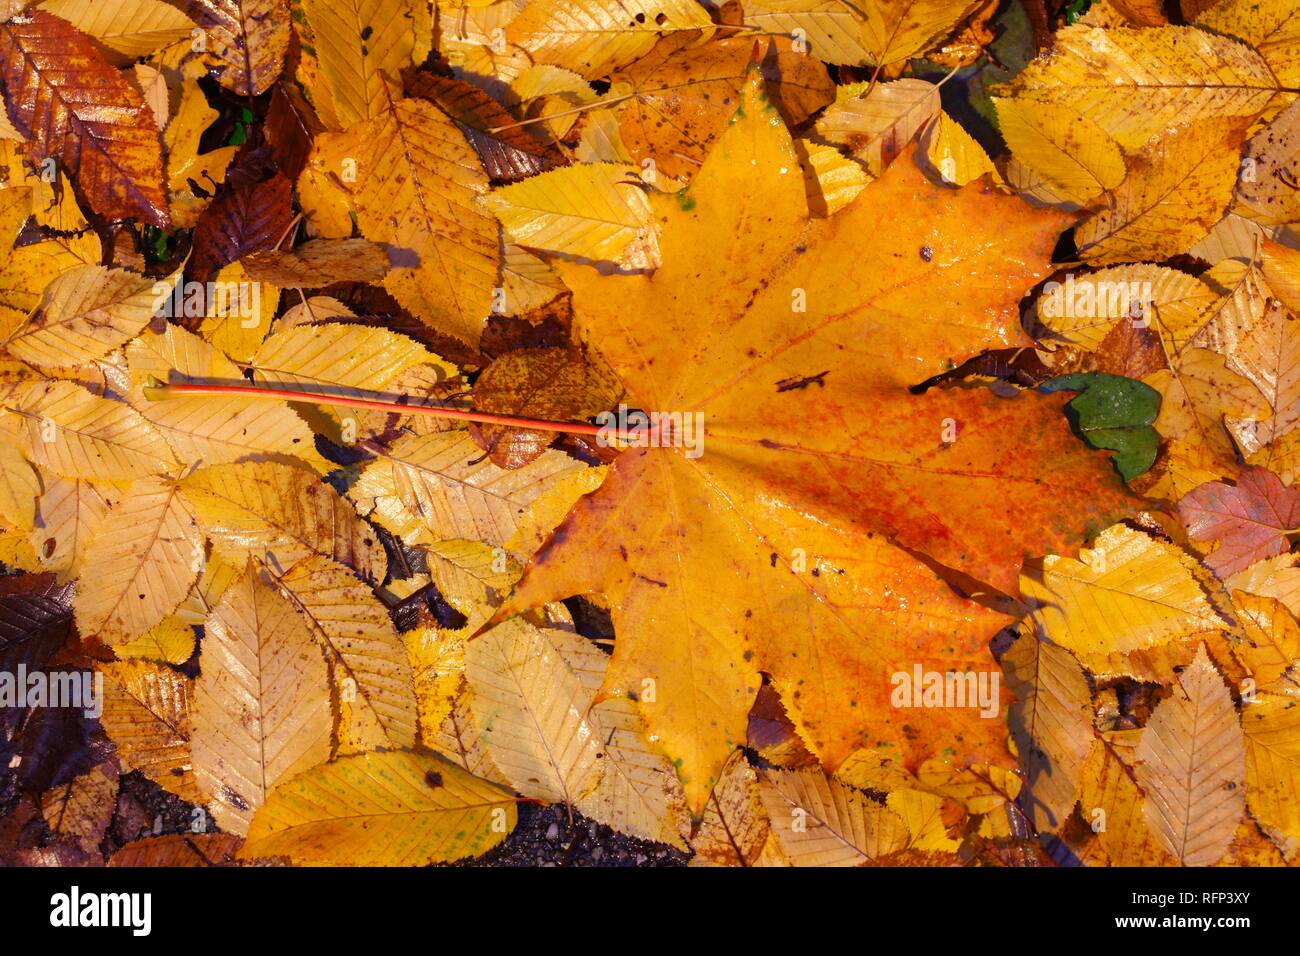 Maple leaf, colourful autumn leaves lying on the ground, Germany Stock Photo